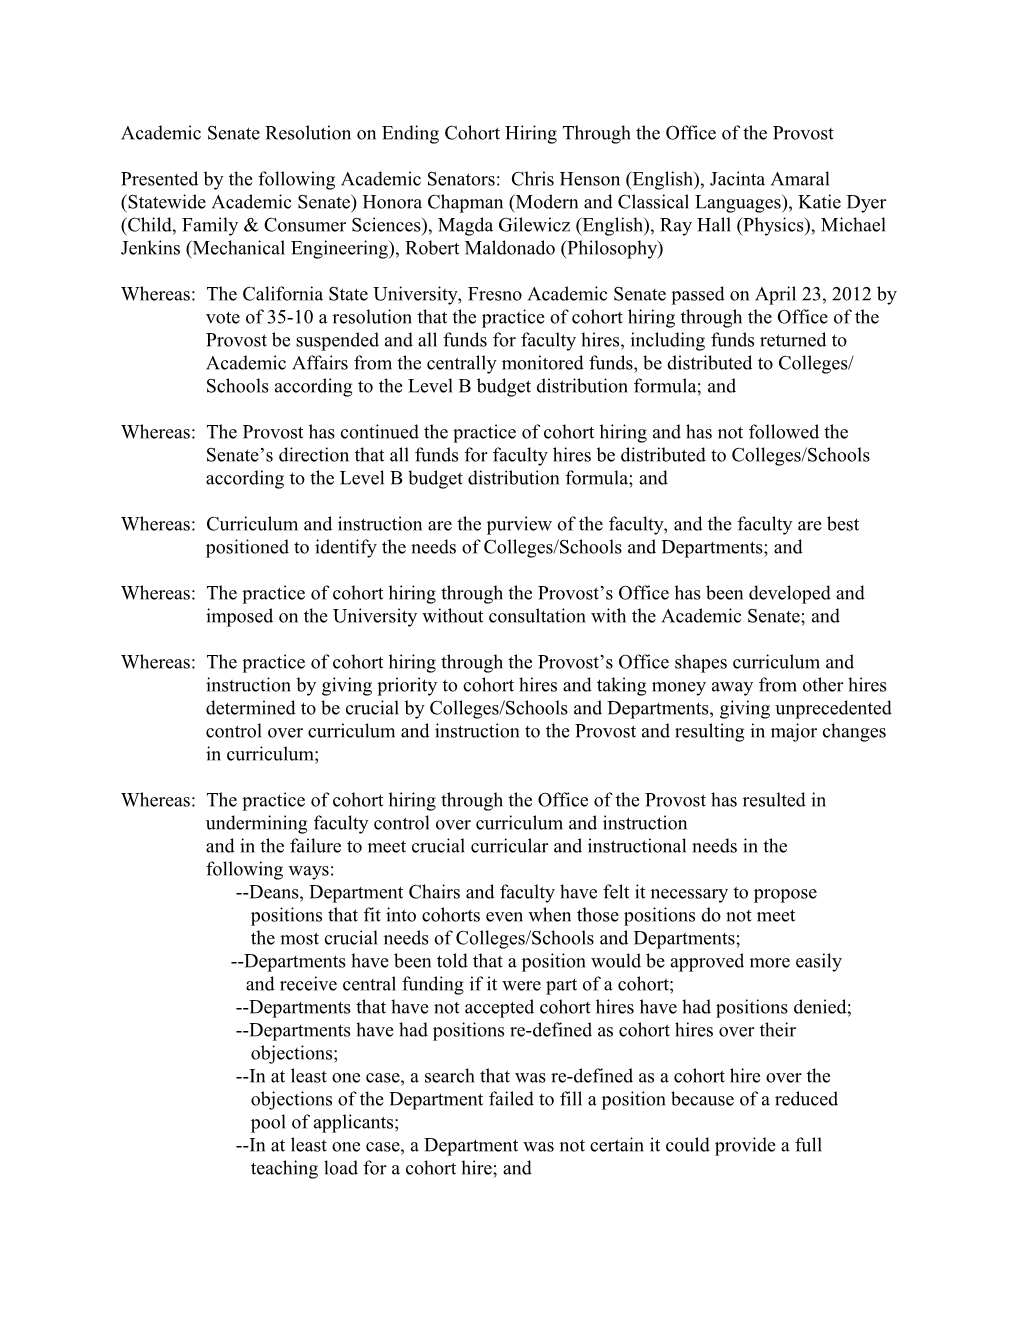 Academic Senate Resolution on Ending Cohort Hiring Through the Office of the Provost